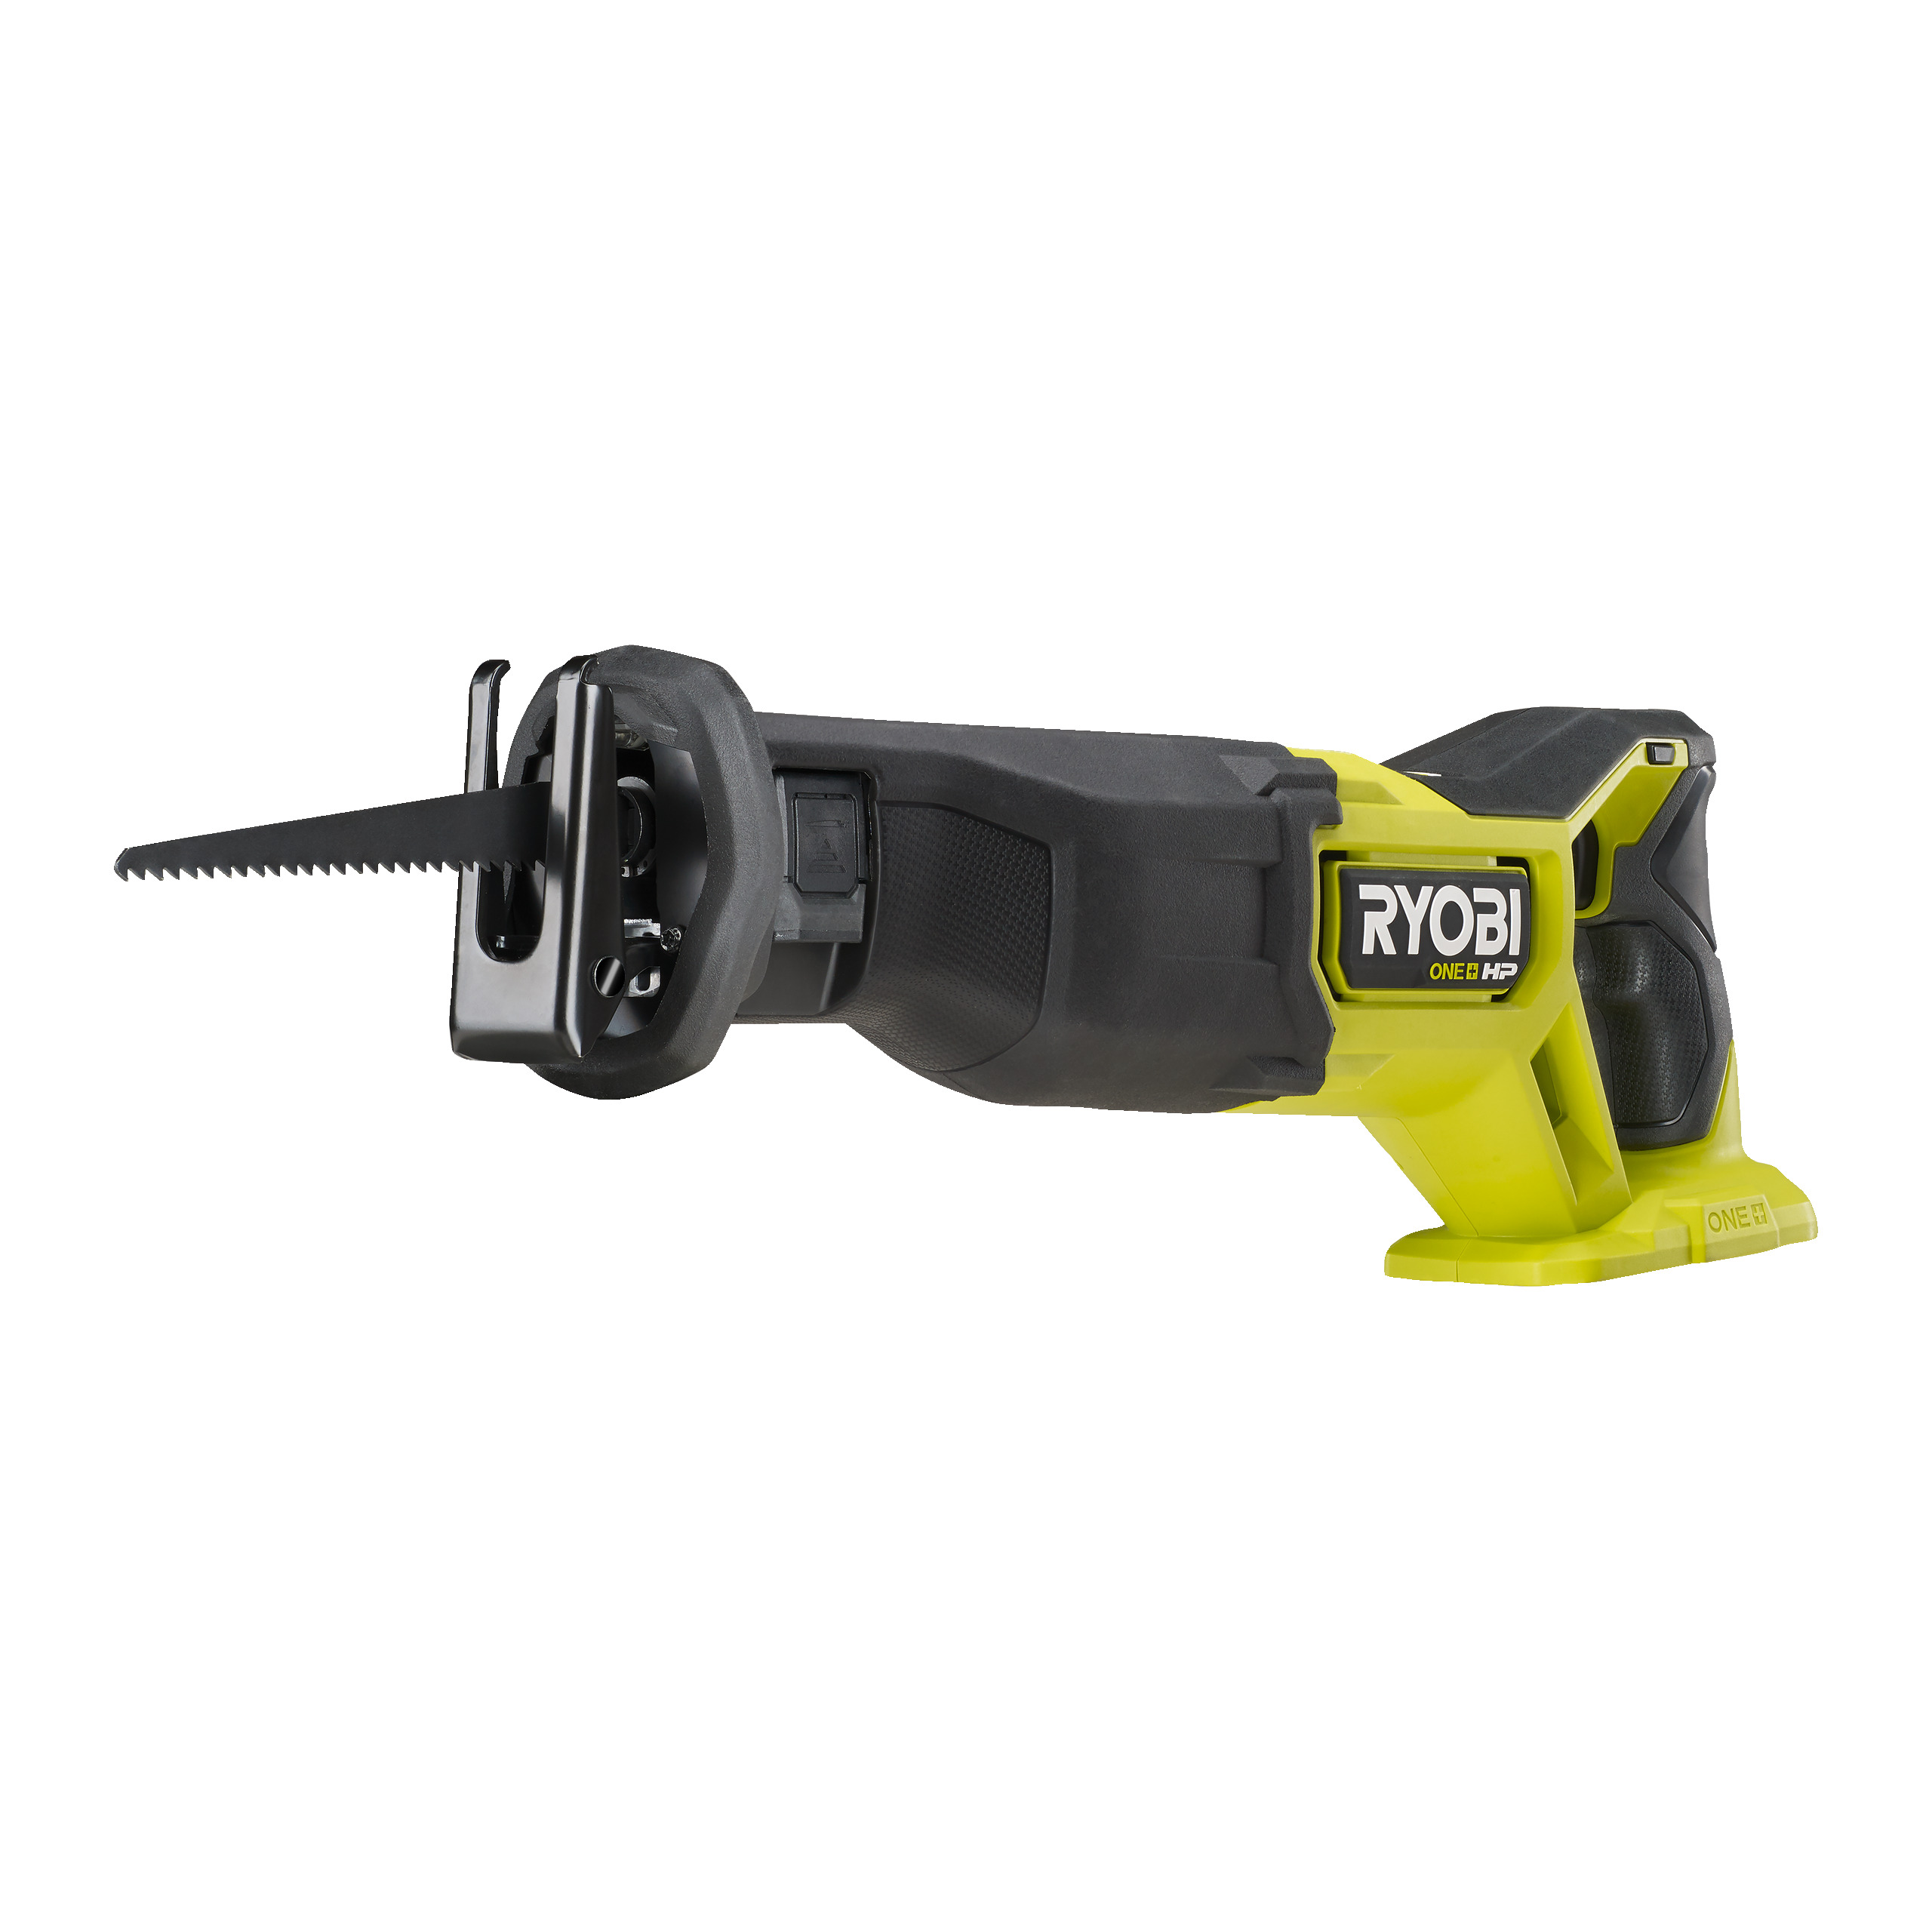 18V ONE+™ HP Cordless Brushless Reciprocating Saw (Bare Tool)_snippet_video_1